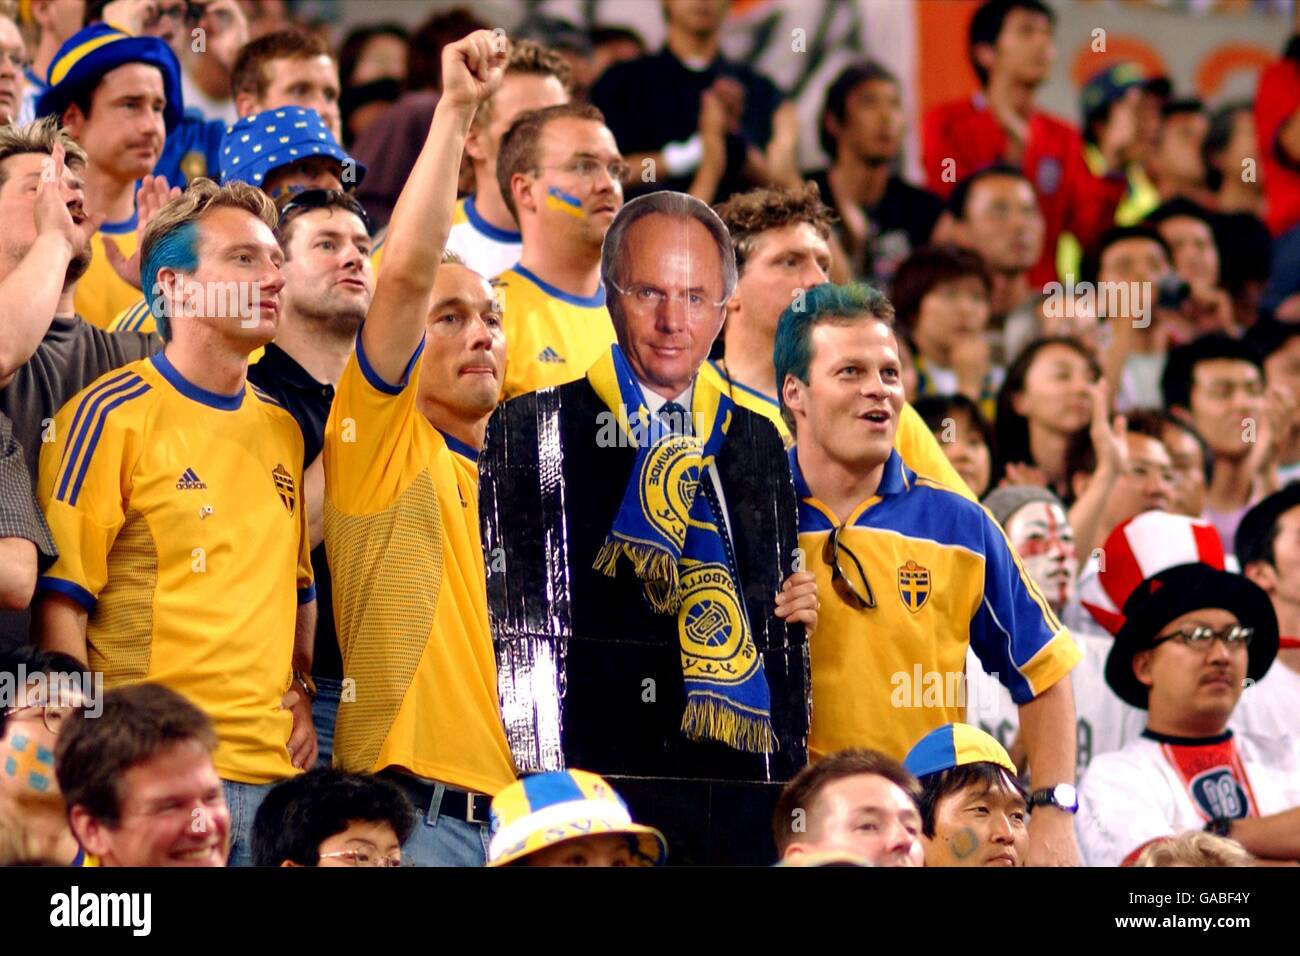 Swedish fans hold up a cardboard cut out of their fellow countryman Sven Goran Eriksson who is the England Manager Stock Photo